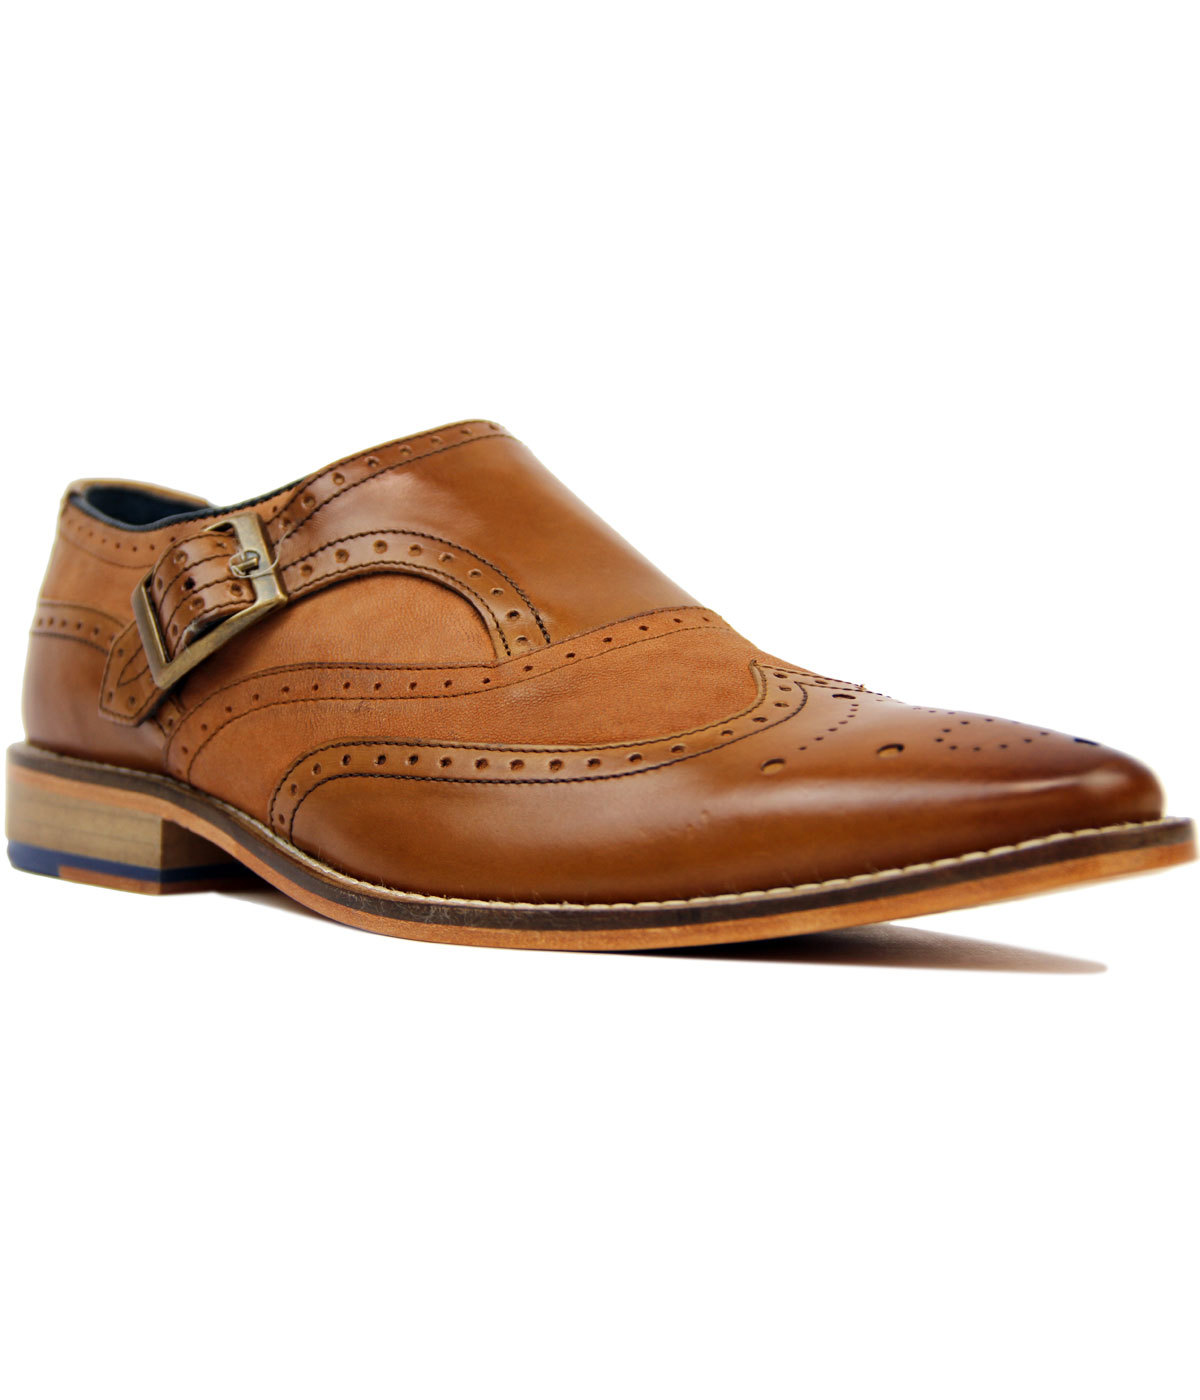 Buckley GOODWIN SMITH 1960s Mod Monk Strap Brogues